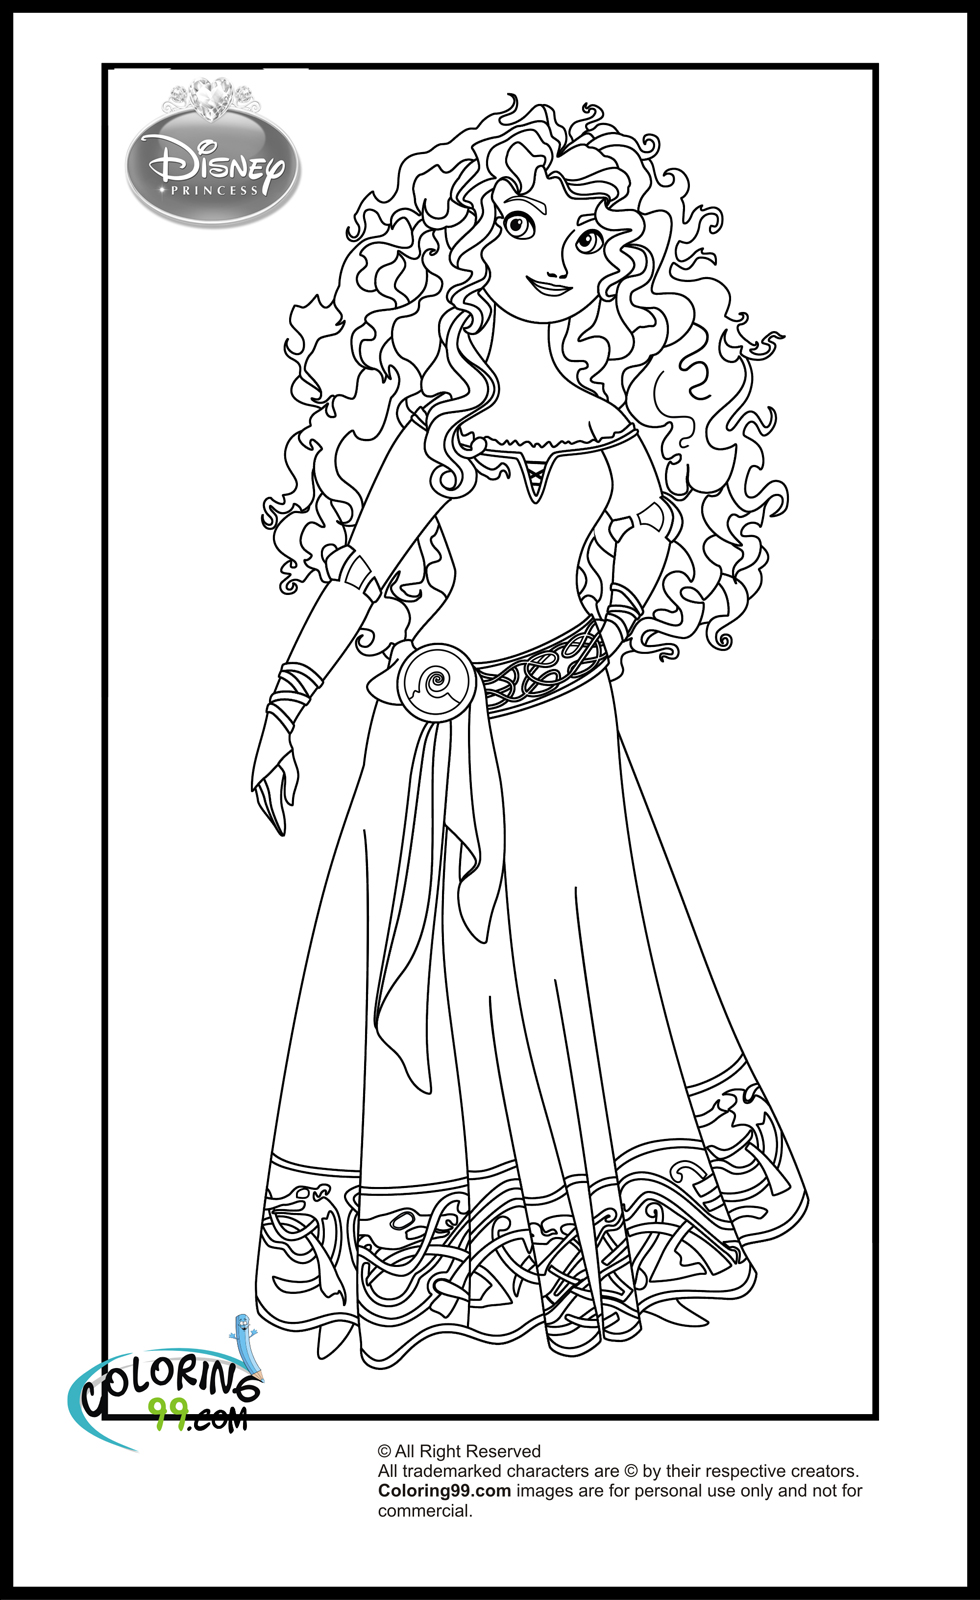 Download Fans Request - Disney Princess with Merida from Brave ...